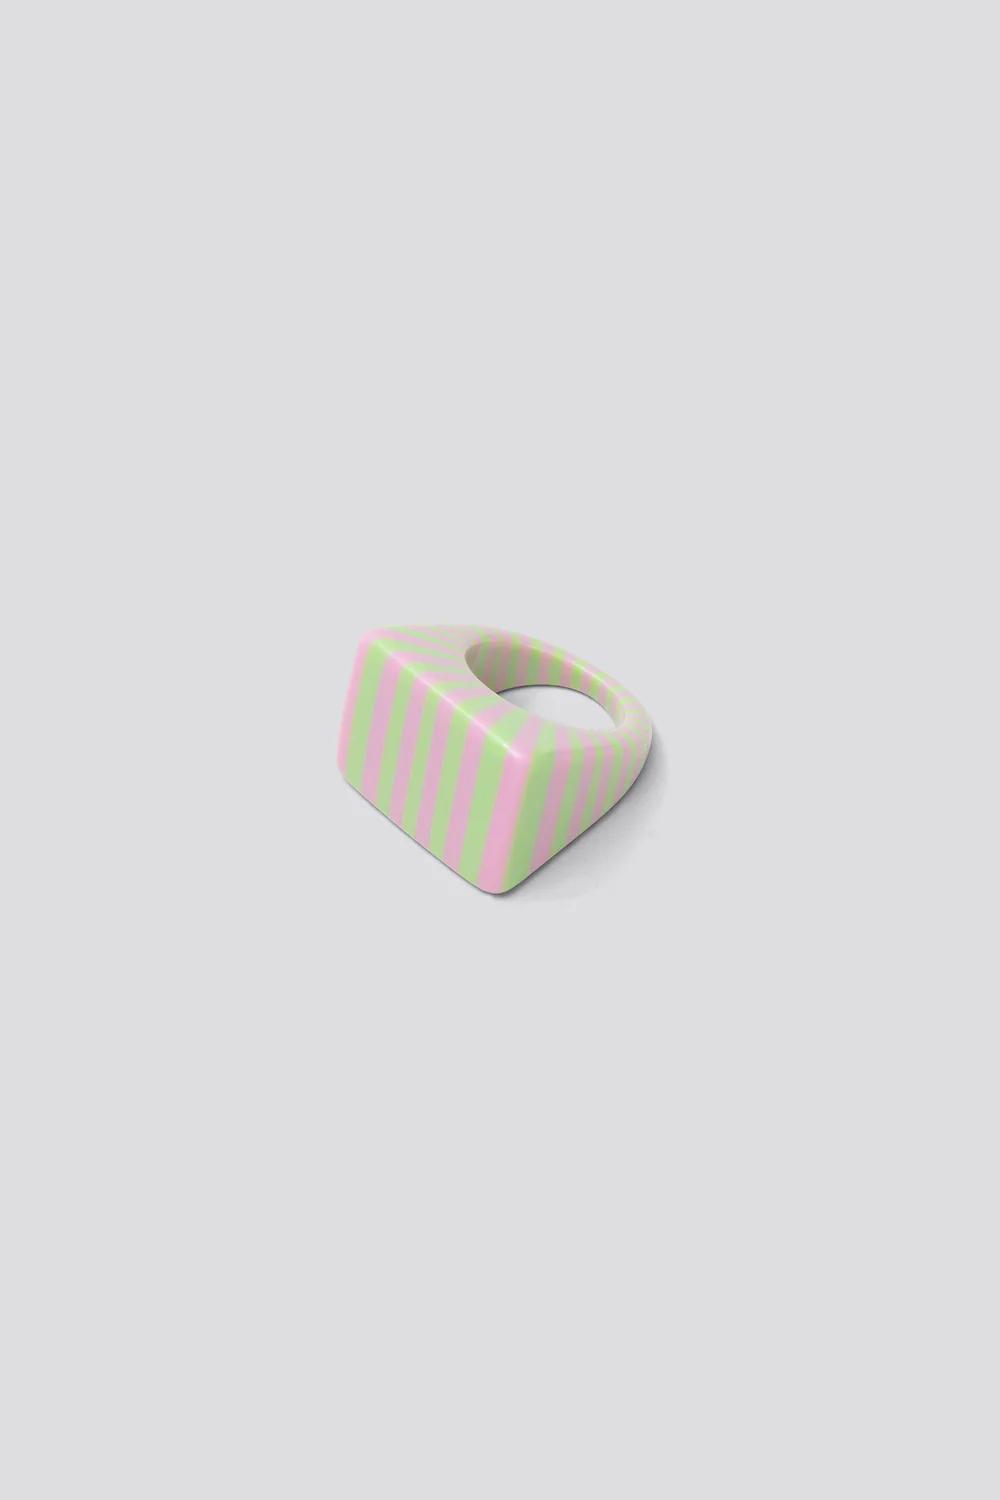 Product Image for Dew Ring, Watermelon